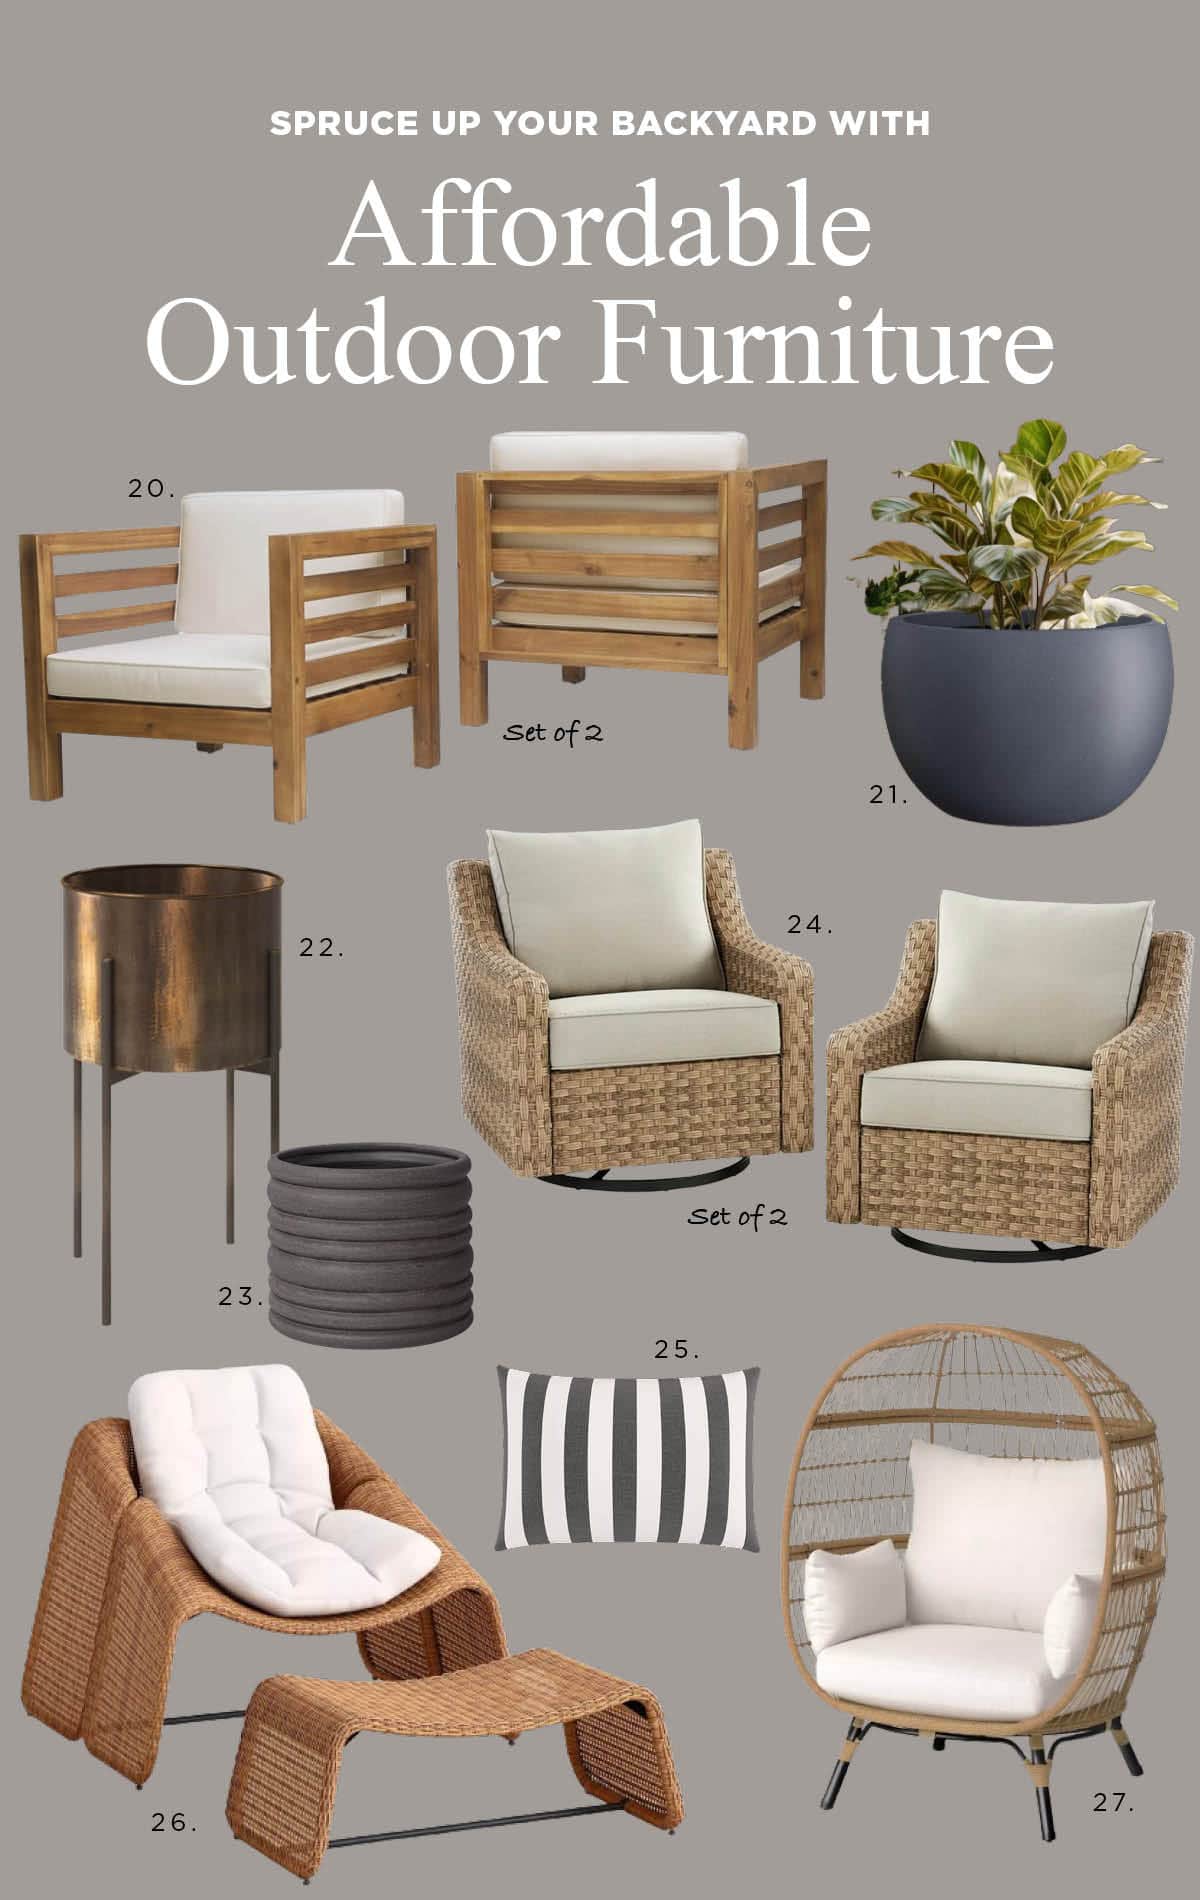 Find comfortable and affordable outdoor rocking chairs that swivel and glide, the outdoor egg chair I own and love, throw pillows, and planters, fire pits, and more.